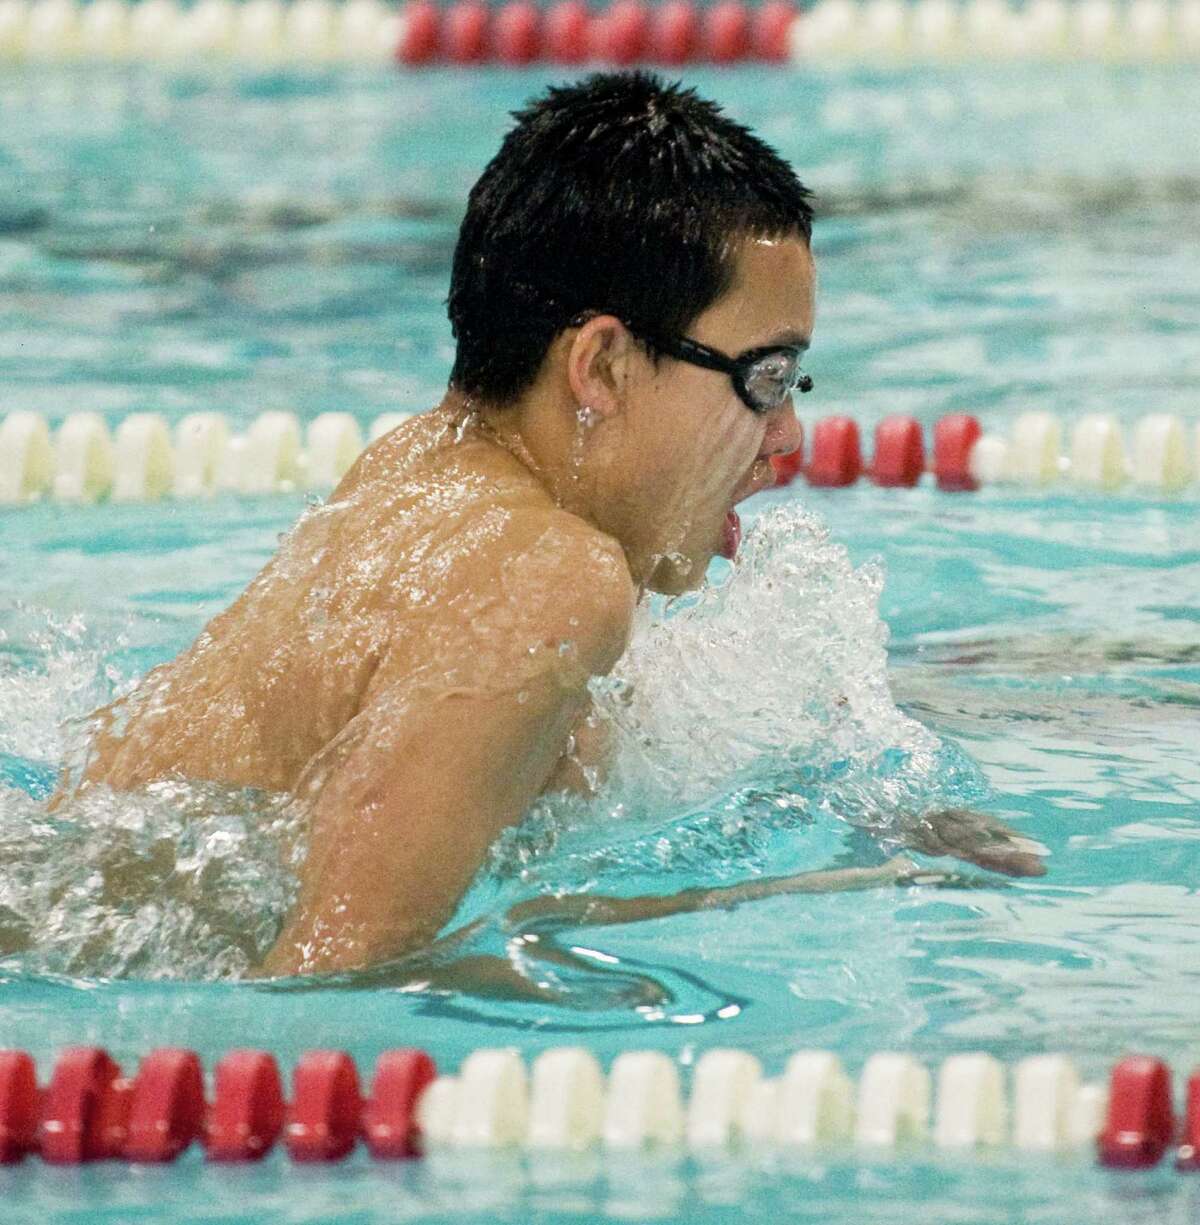 Pomperaug High School's Henry Hu swims the 200 Individual Medley during a meet against Brookfield High School held at Pomperaug. Friday, Jan. 16, 2015